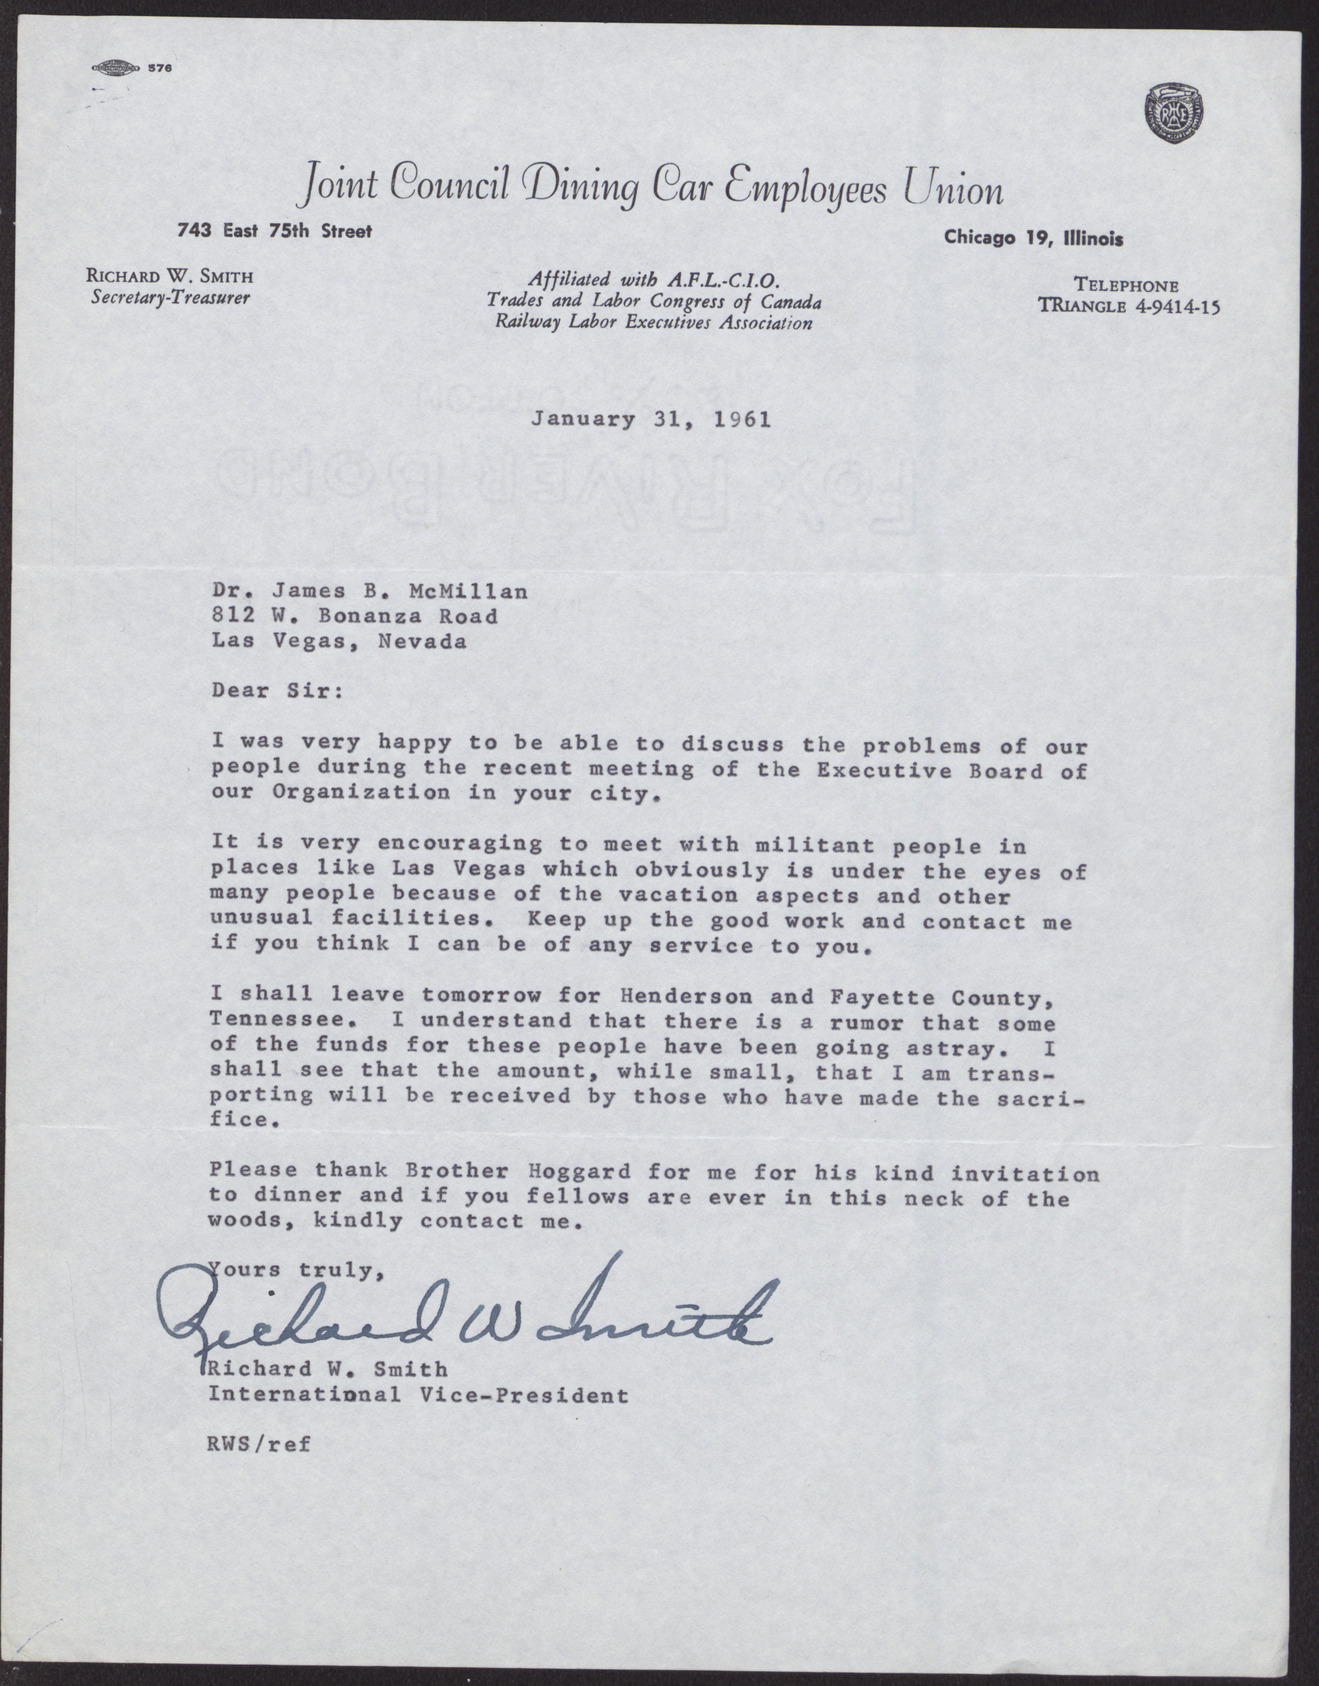 Letter to Dr. James B. McMillan from Richard W. Smith, January 31, 1961